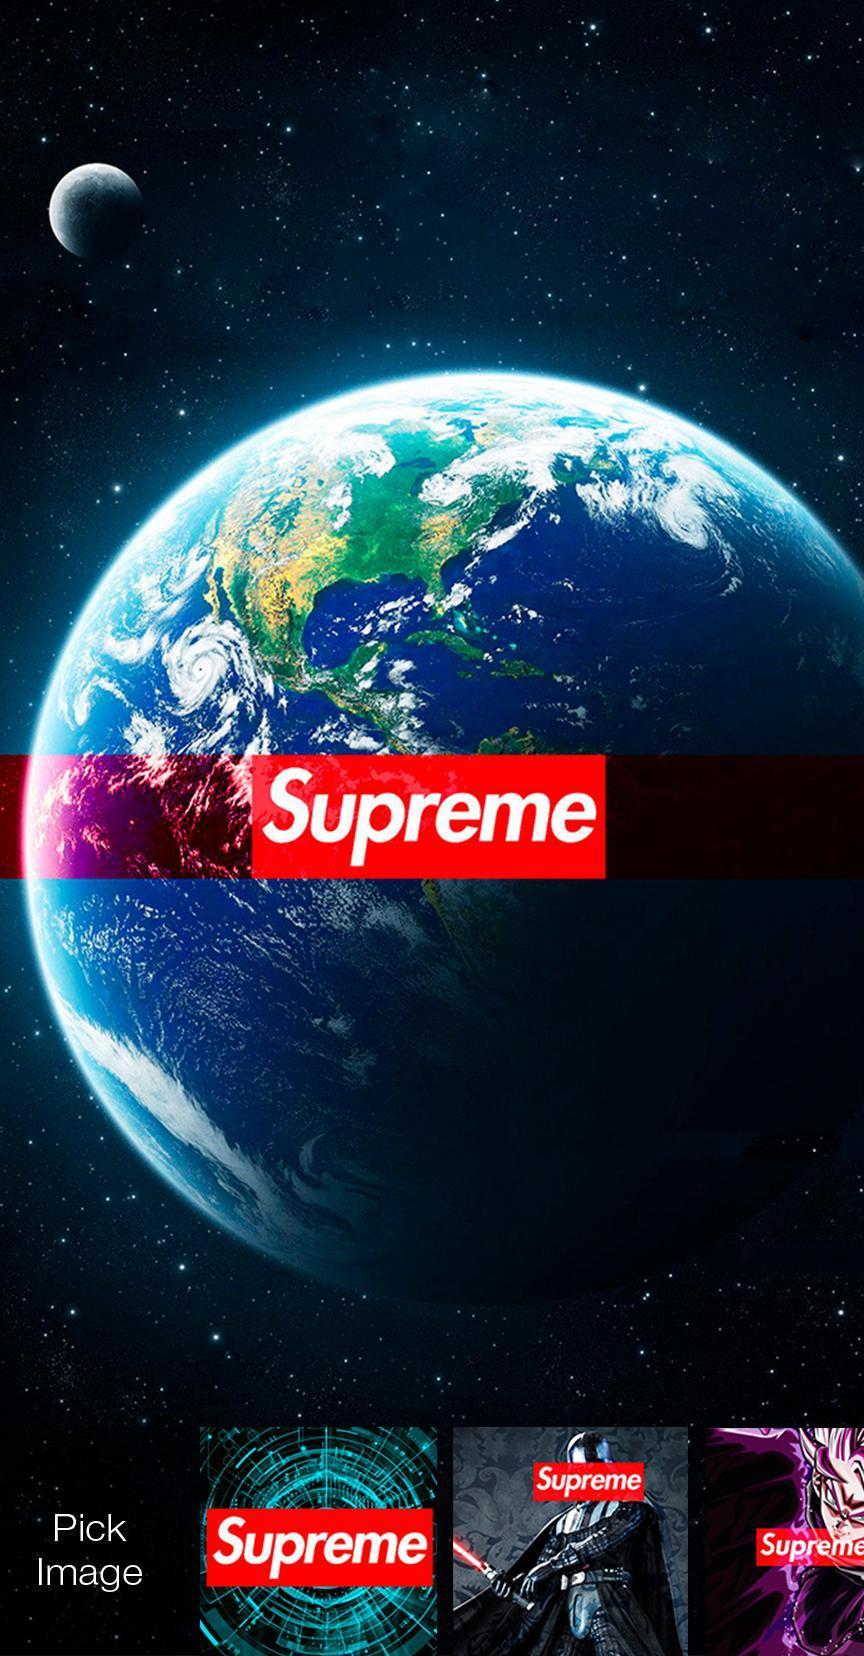 Supreme Aesthetic Cool Wallpaper Lock Screen for Android